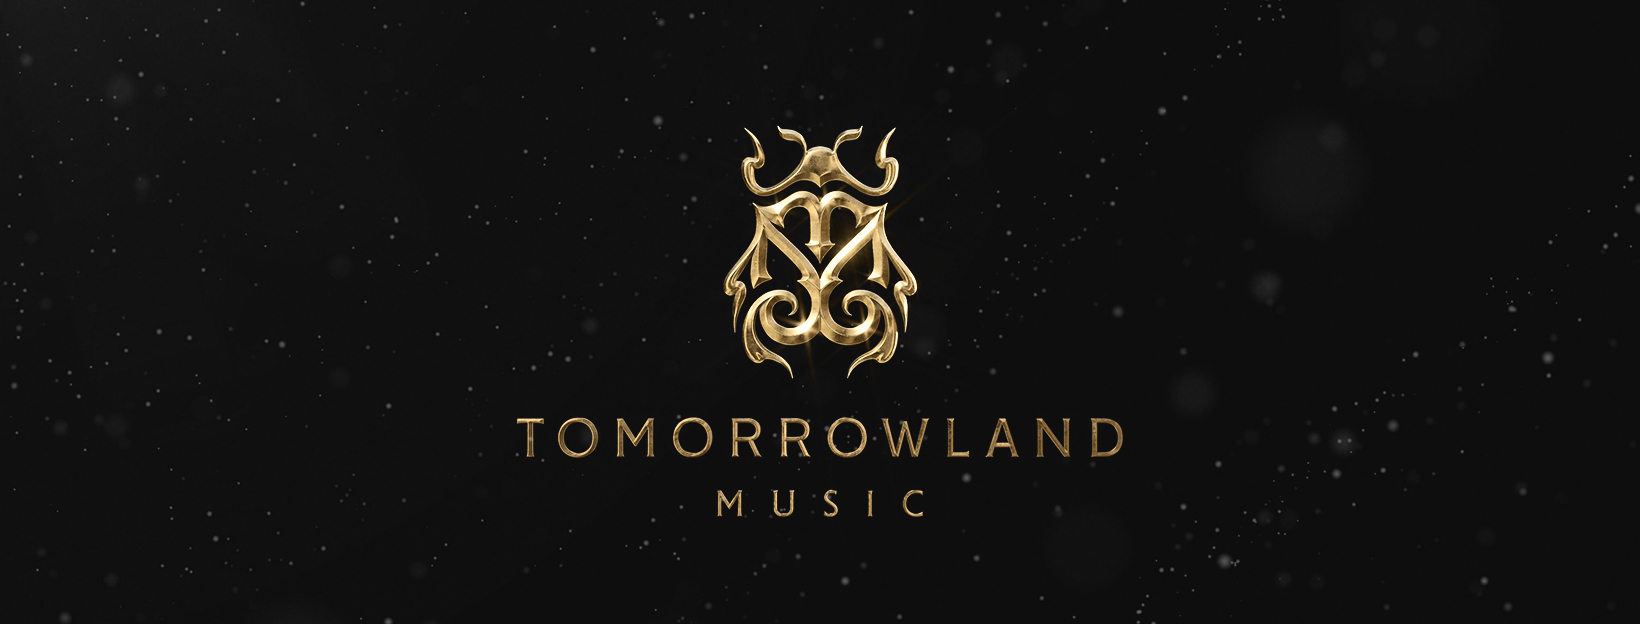 Tomorrowland launches record label and signs exclusive global partnership with Universal Music Group